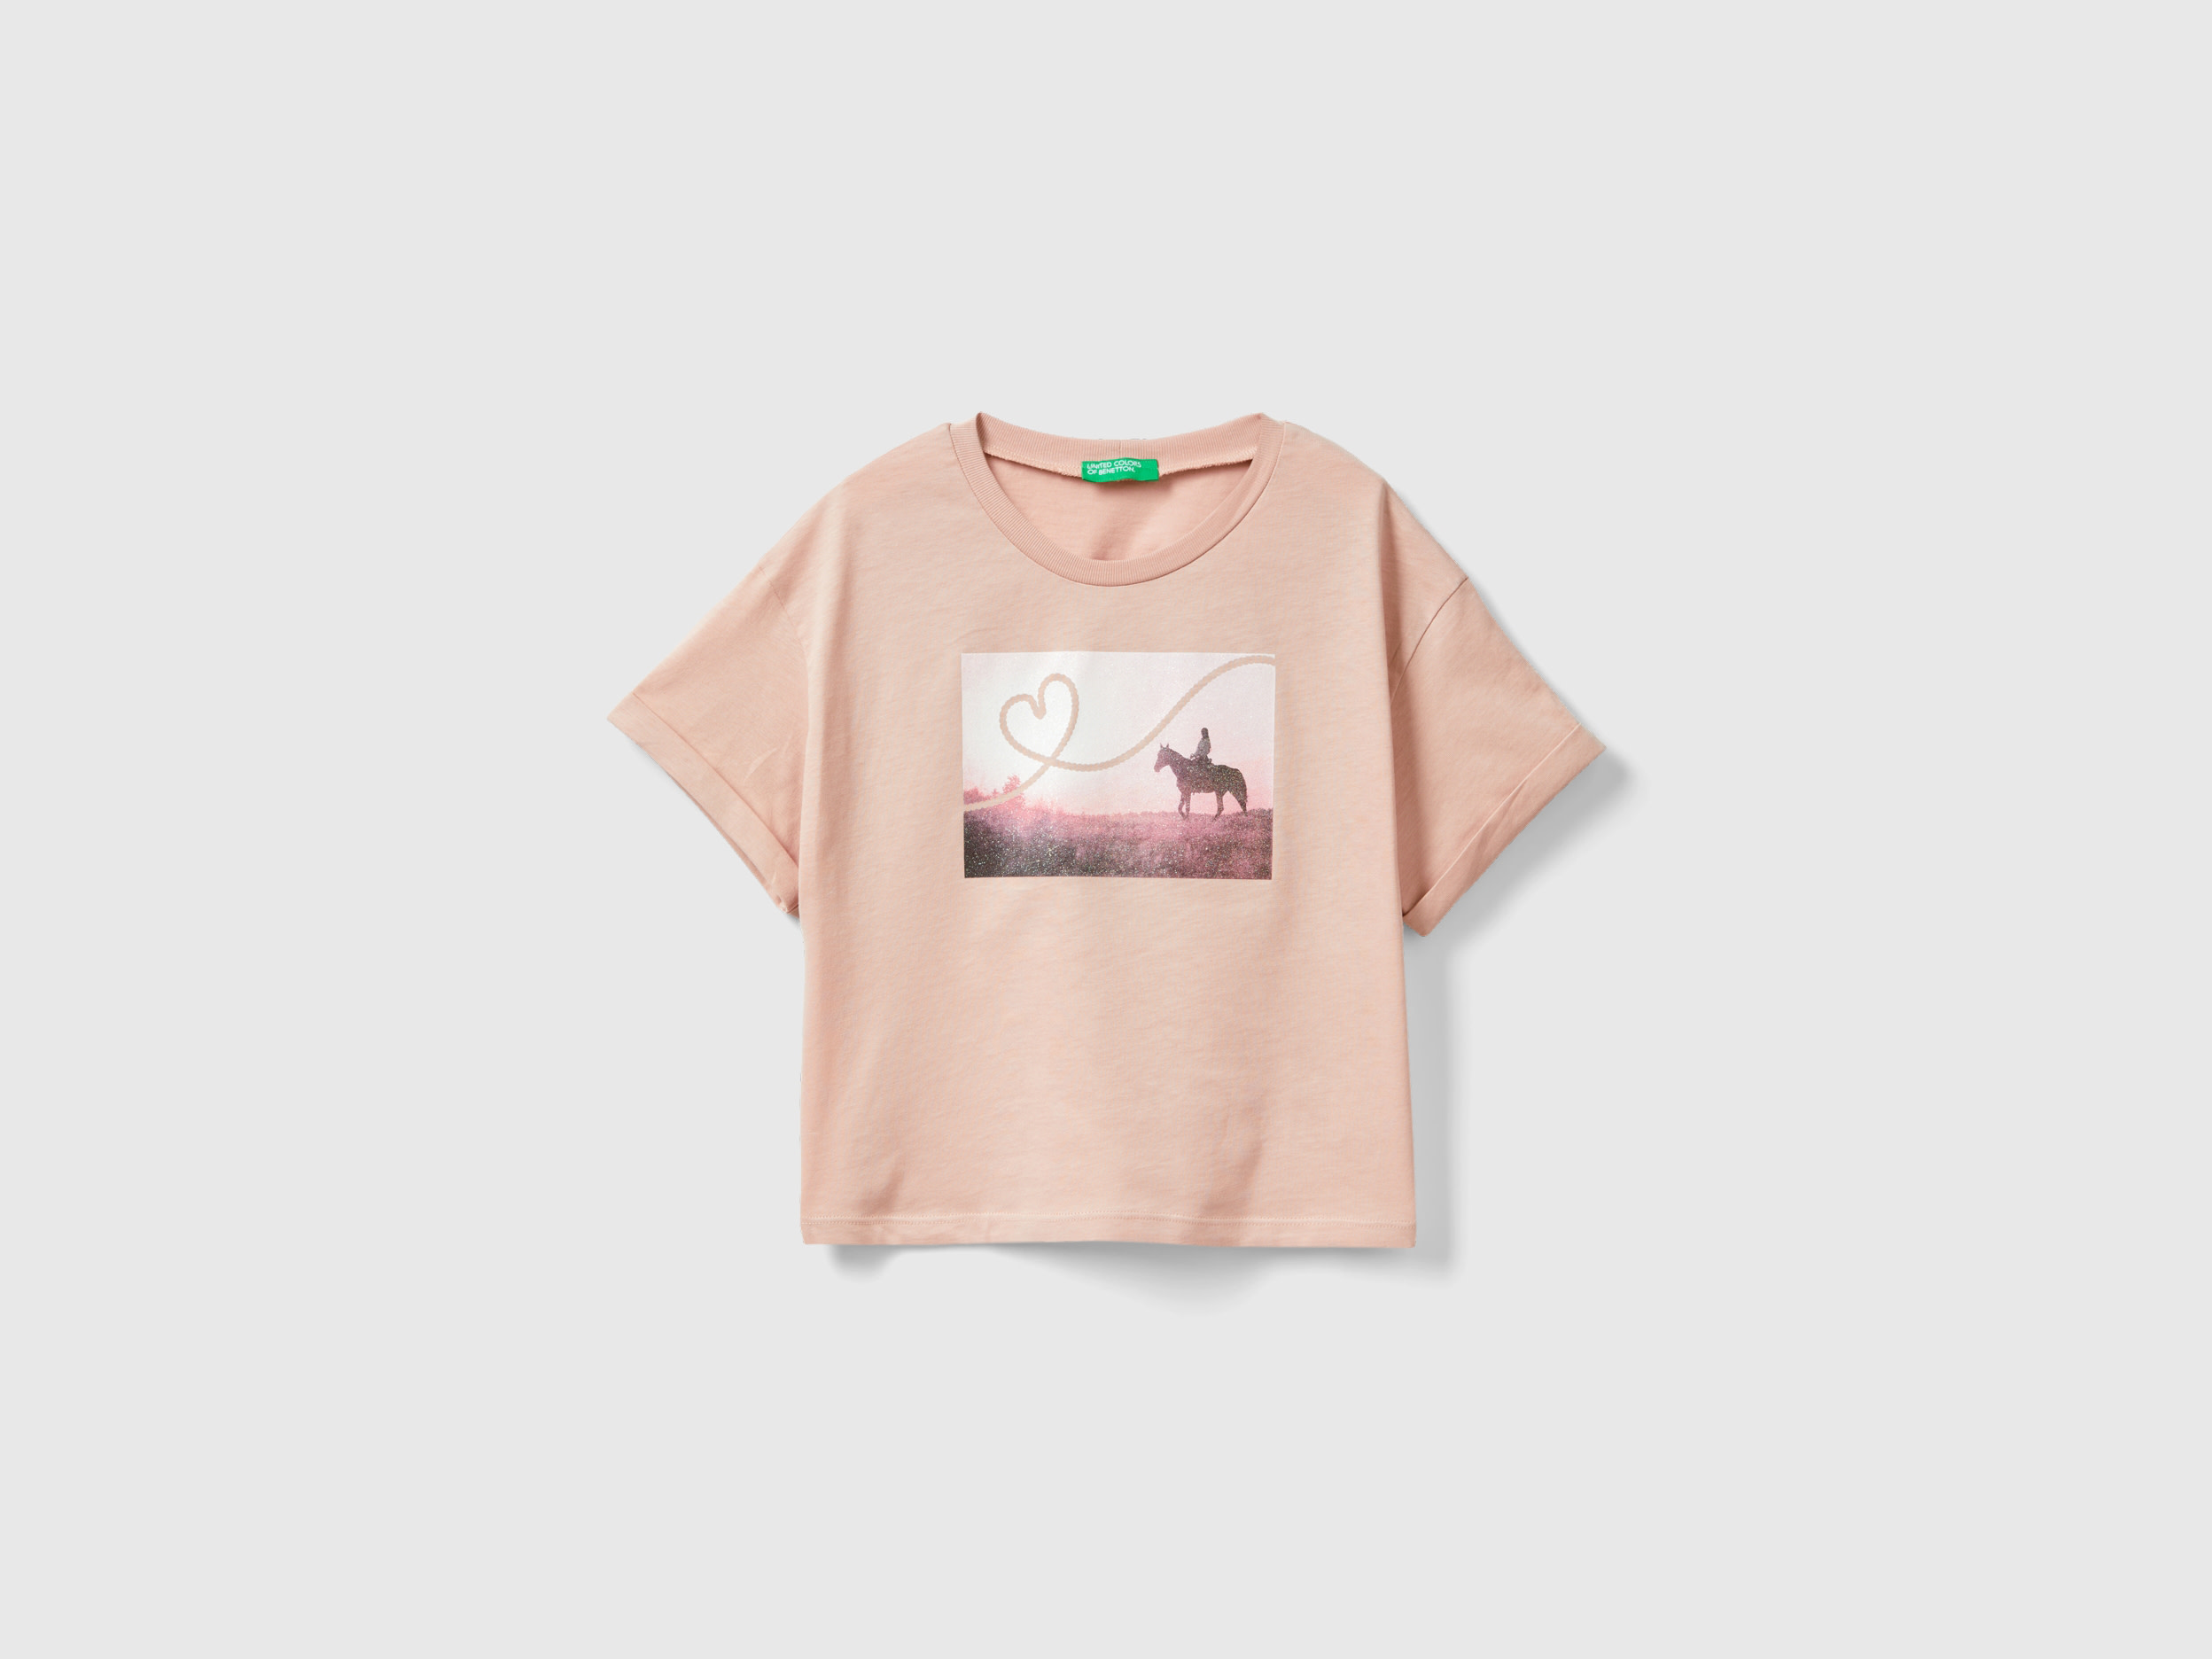 Image of Benetton, T-shirt With Photographic Horse Print, size M, Soft Pink, Kids